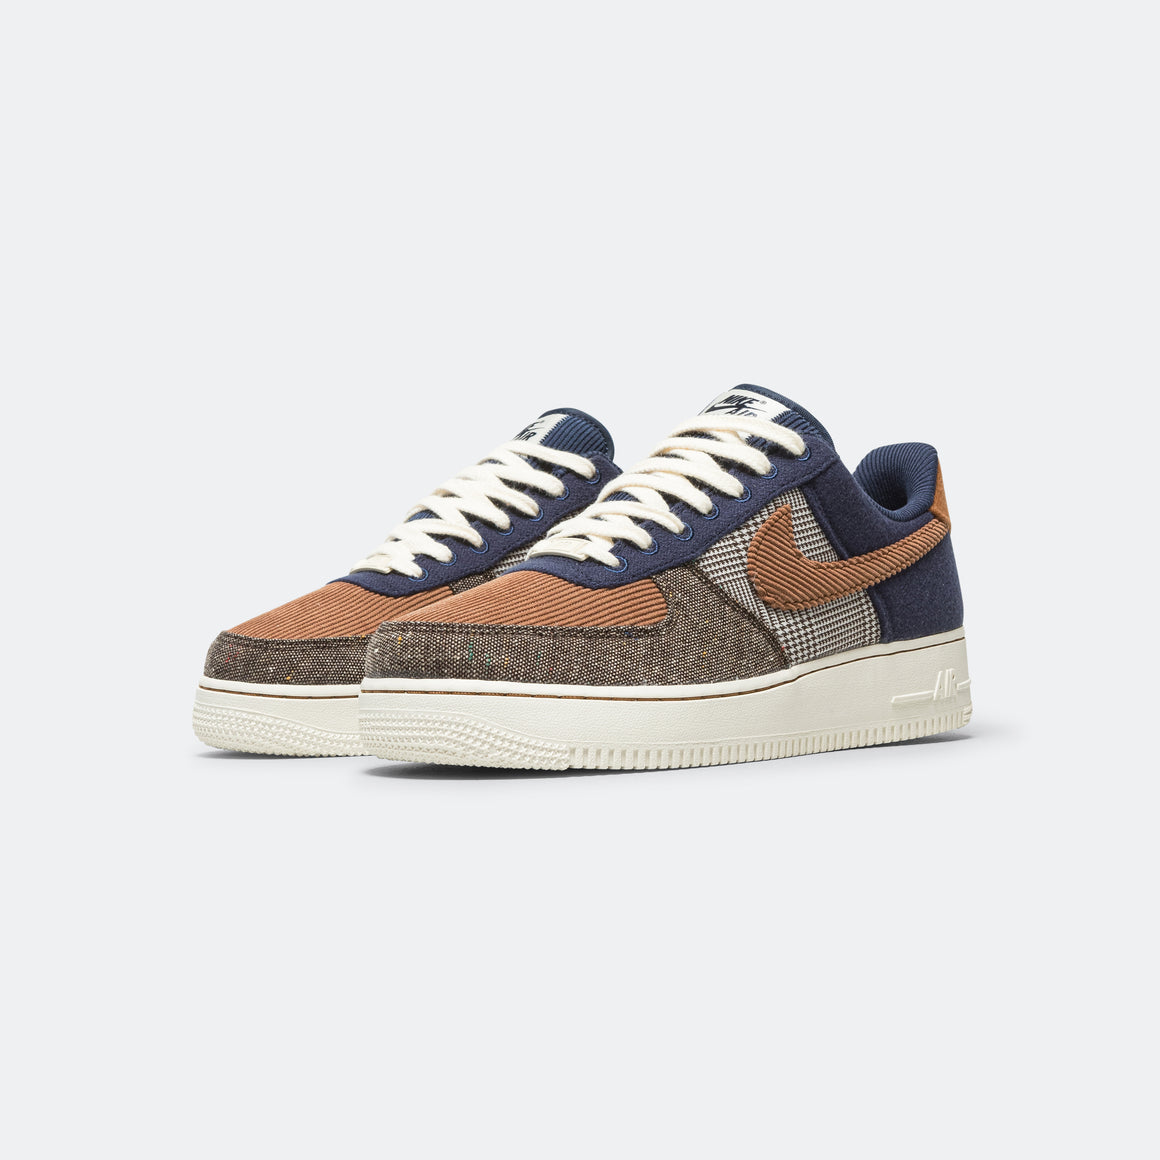 Nike - Air Force 1 '07 PRM - Midnight Navy/Ale Brown-Pale Ivory - UP THERE